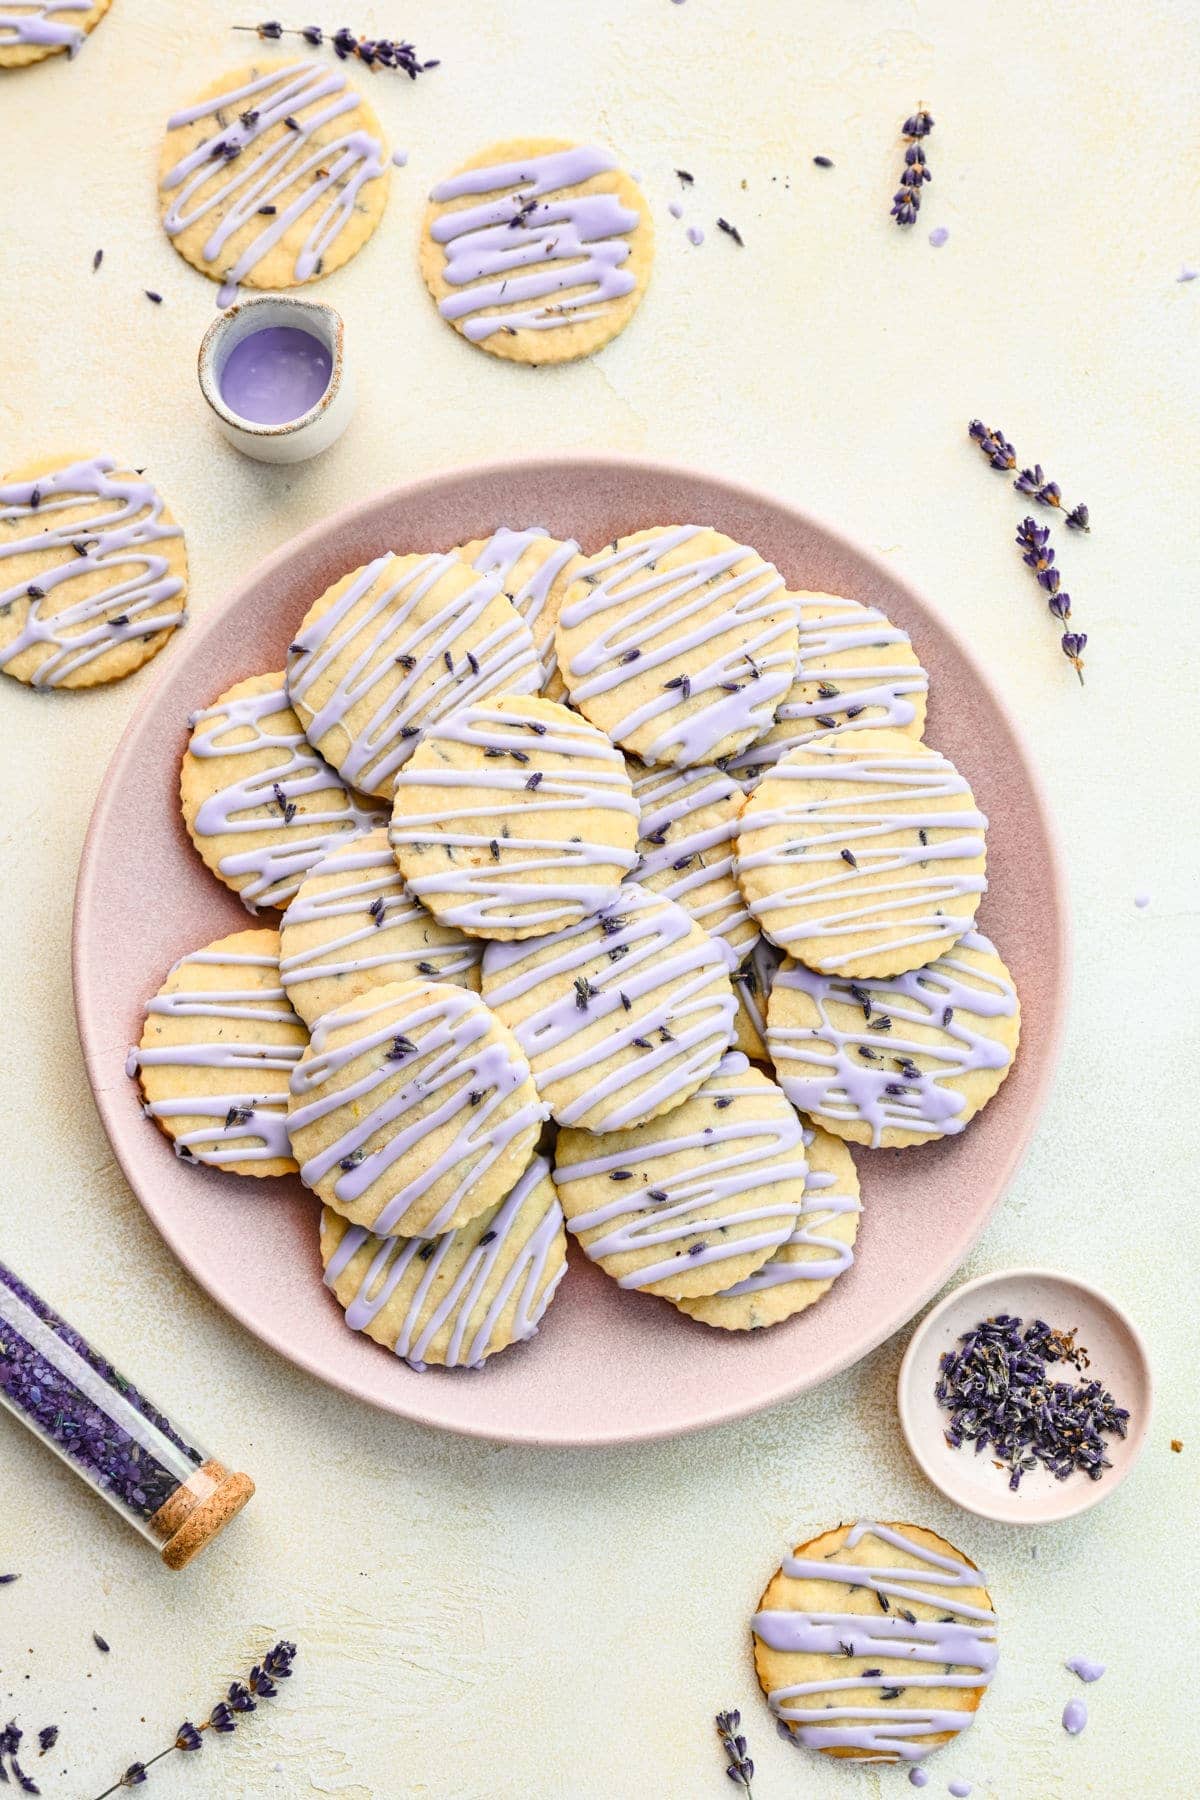 A plate of unique cookies with purple frosting.